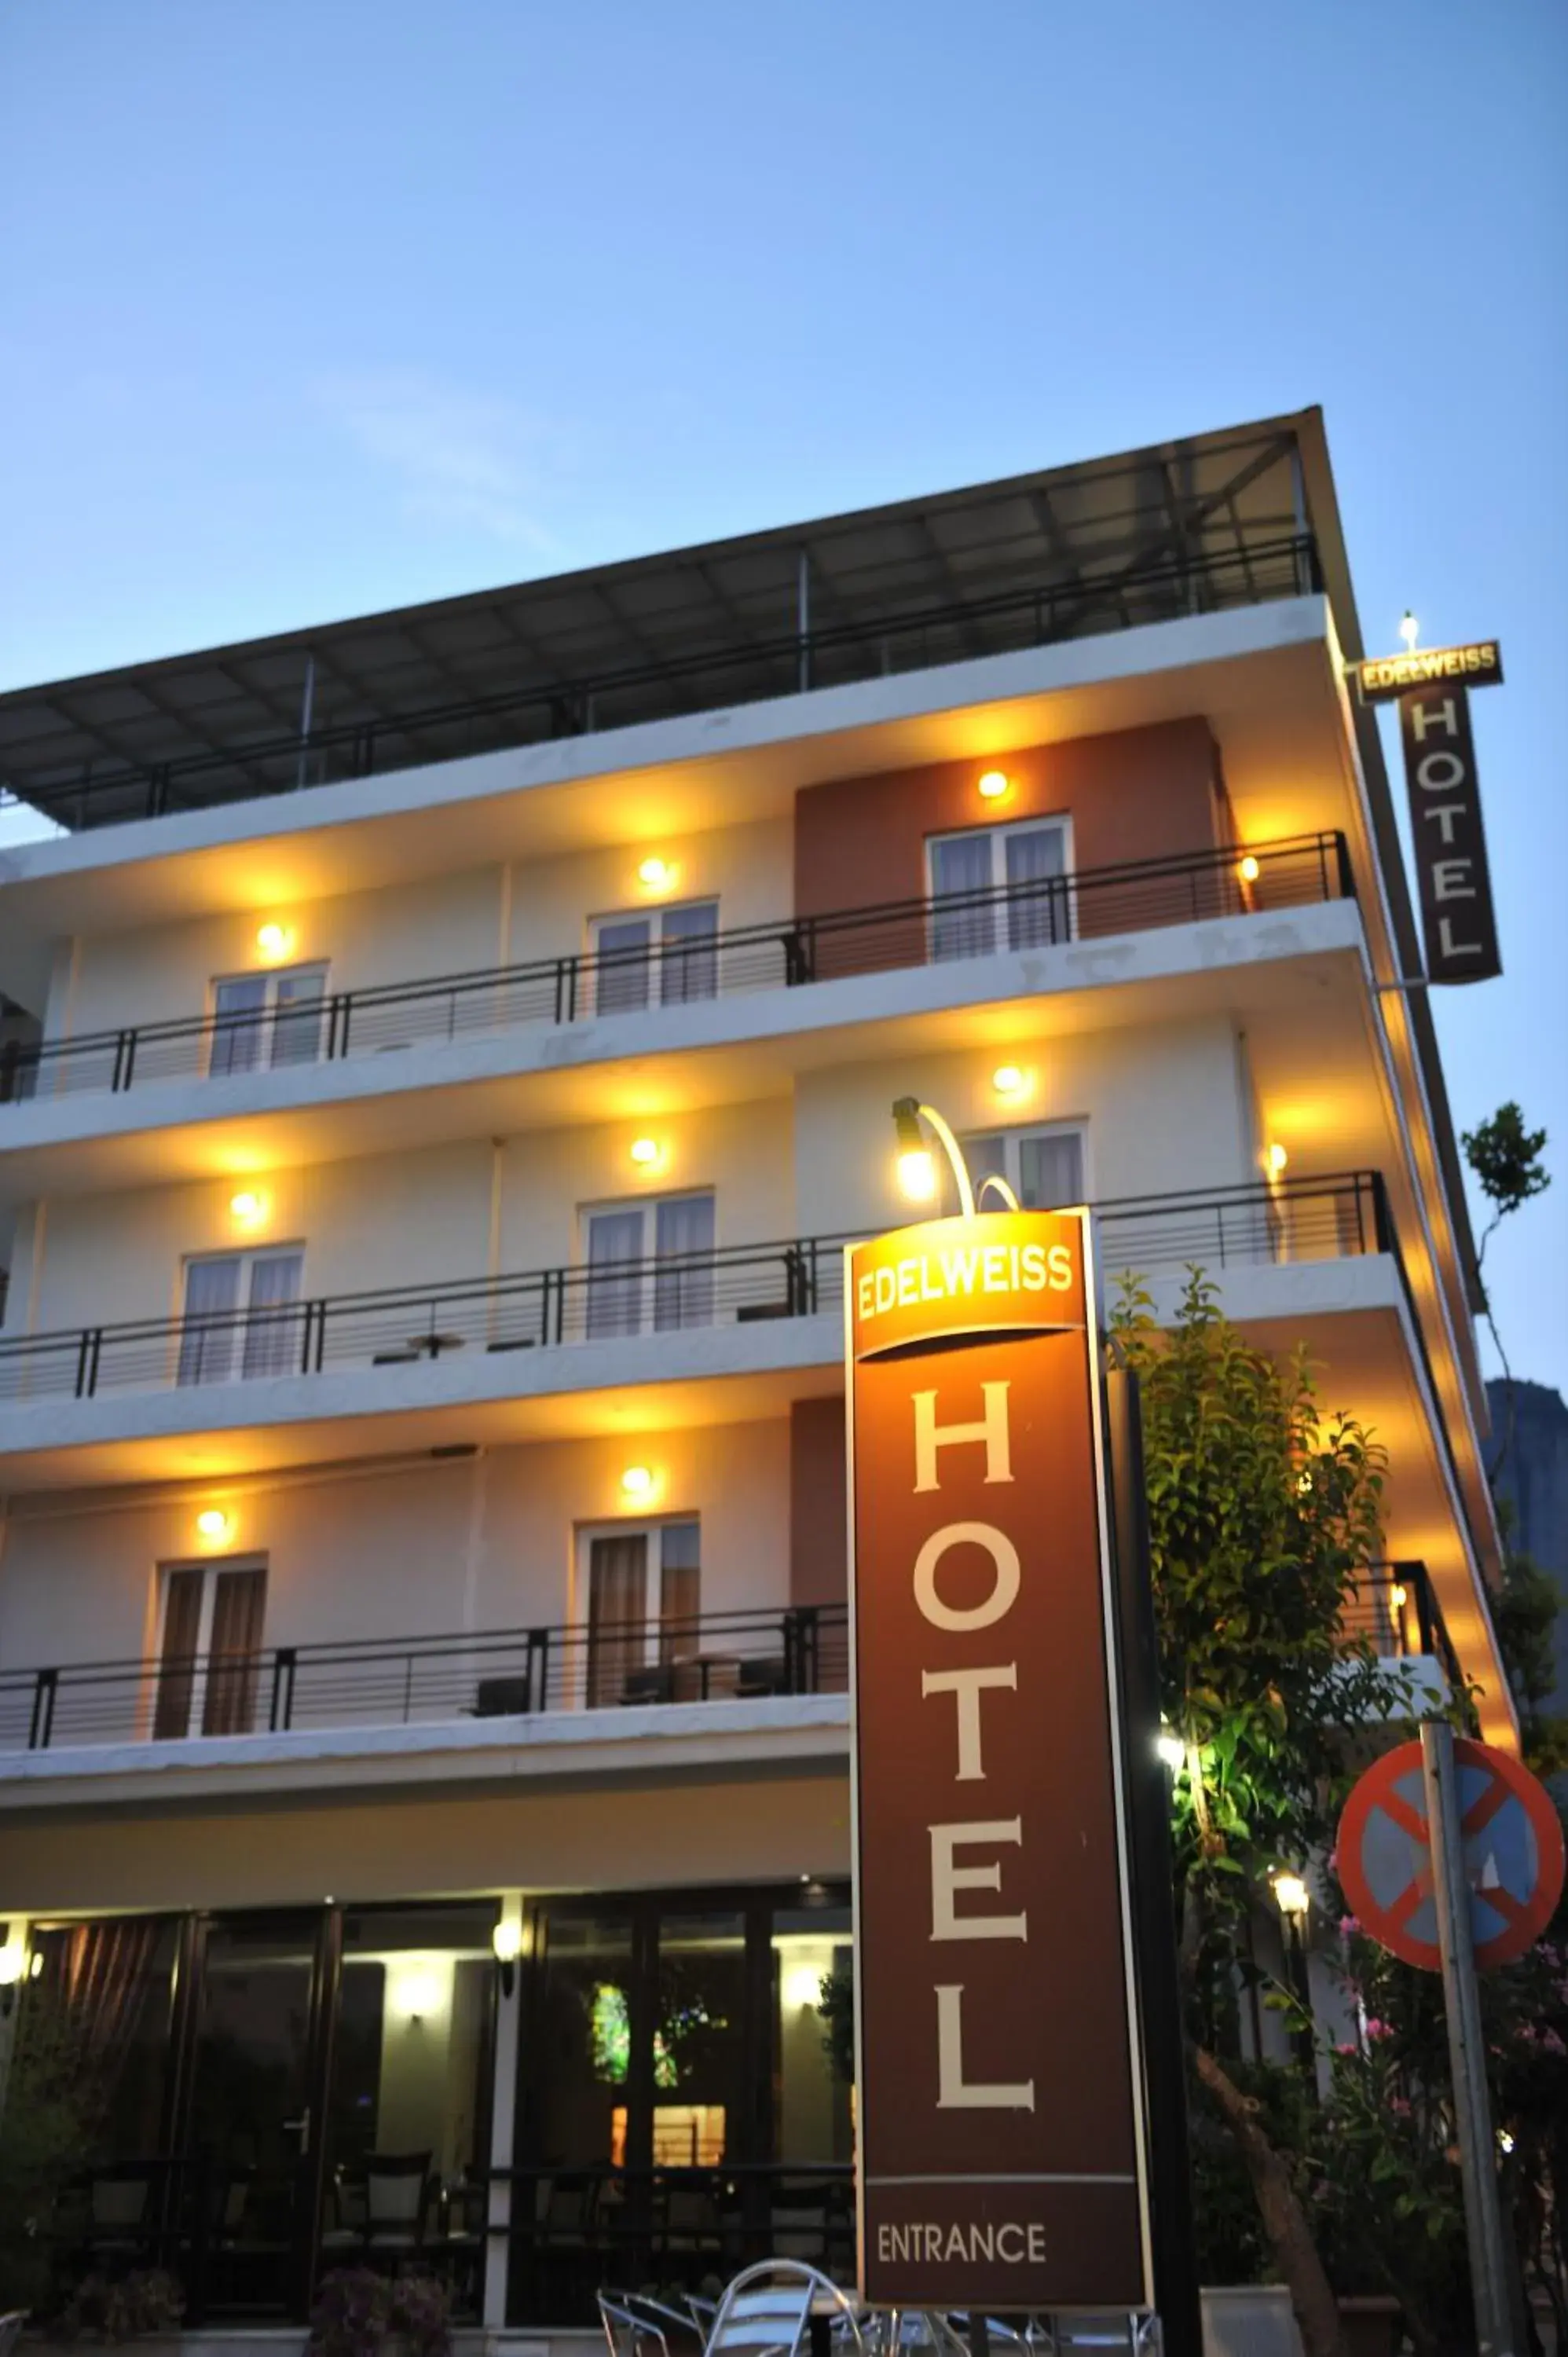 Property Building in Hotel Edelweiss